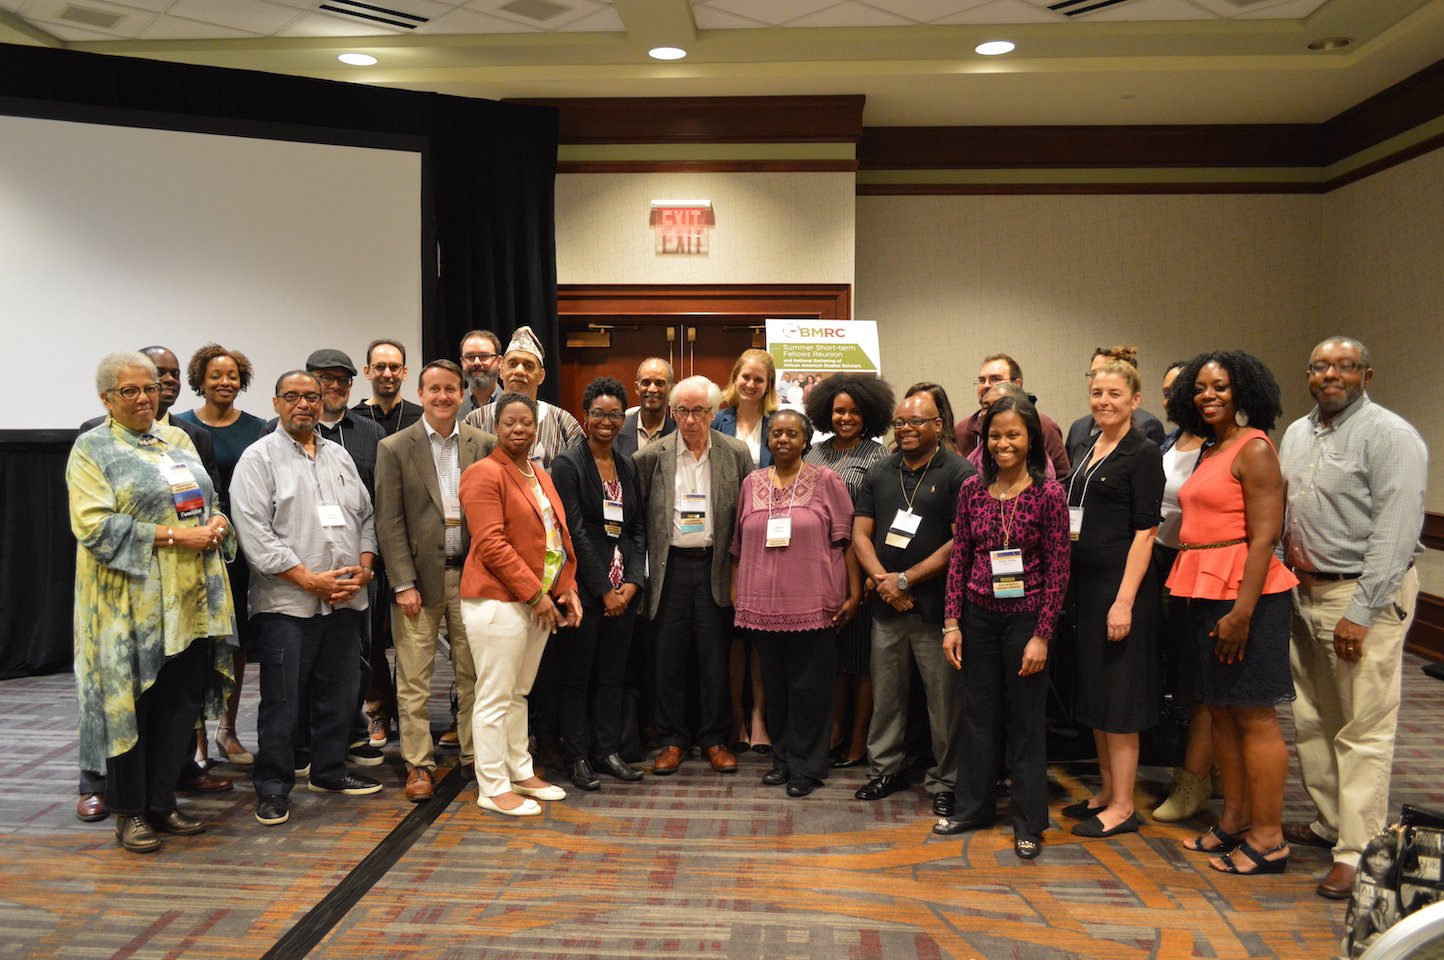 Group photo of attendees at the Reunion included former Fellows, BMRC Board members, BMRC staff, ASALH members and guests.